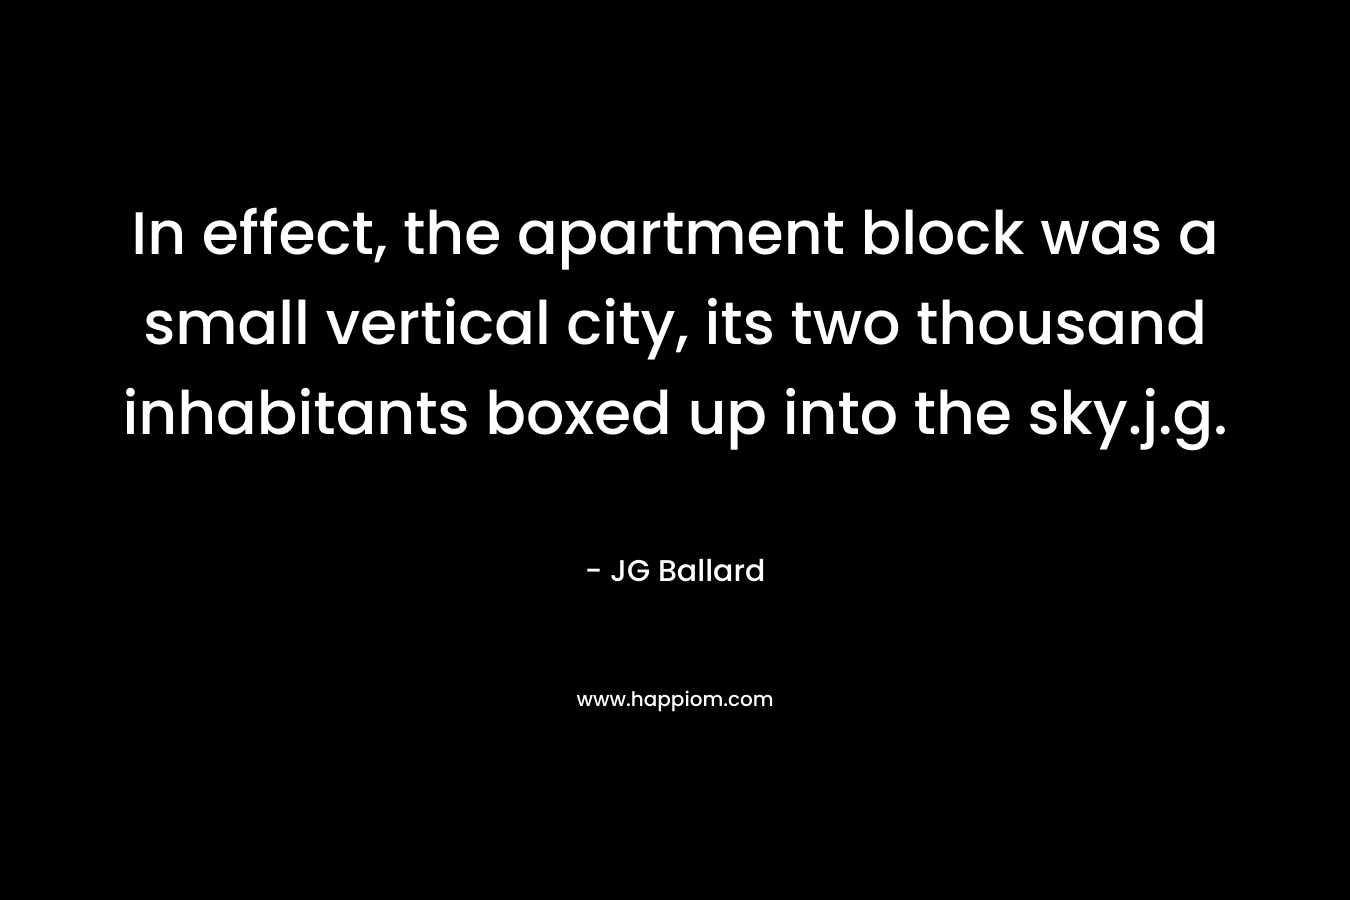 In effect, the apartment block was a small vertical city, its two thousand inhabitants boxed up into the sky.j.g. – JG Ballard